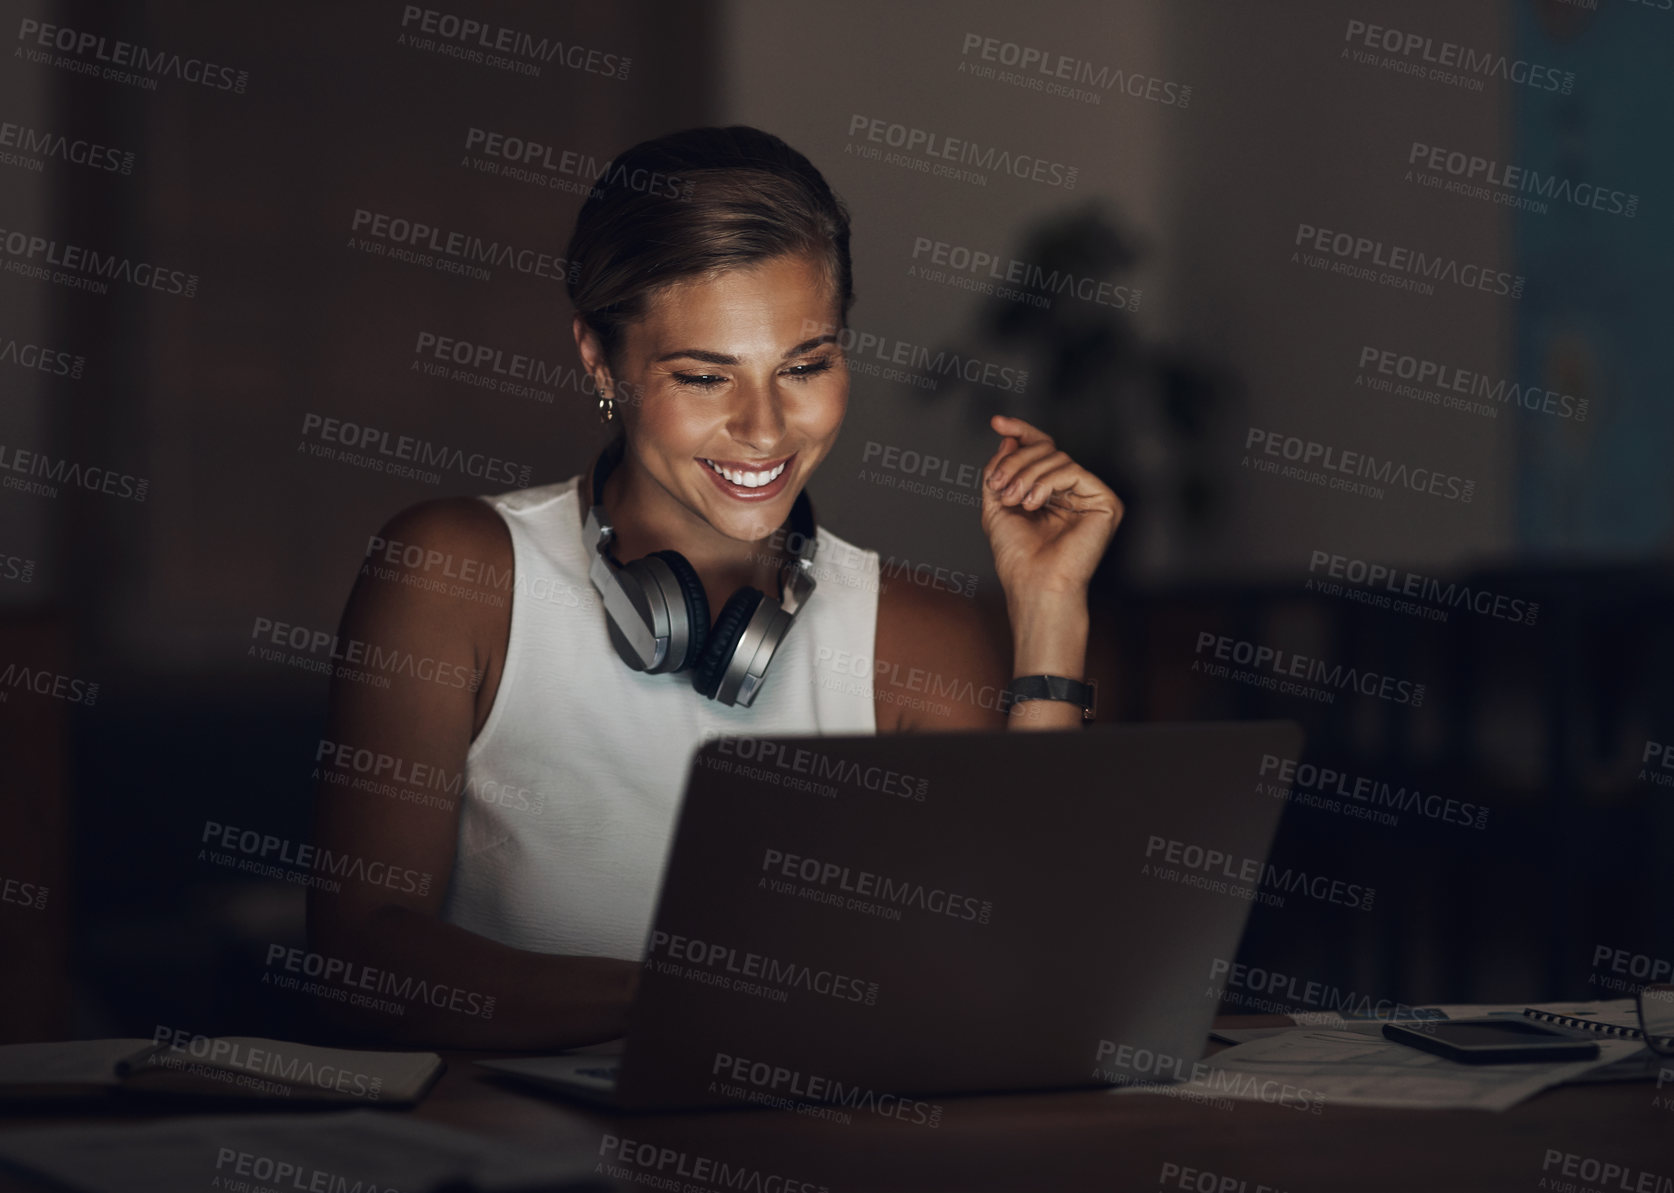 Buy stock photo Shot of a young businesswoman using a laptop during a late night at work